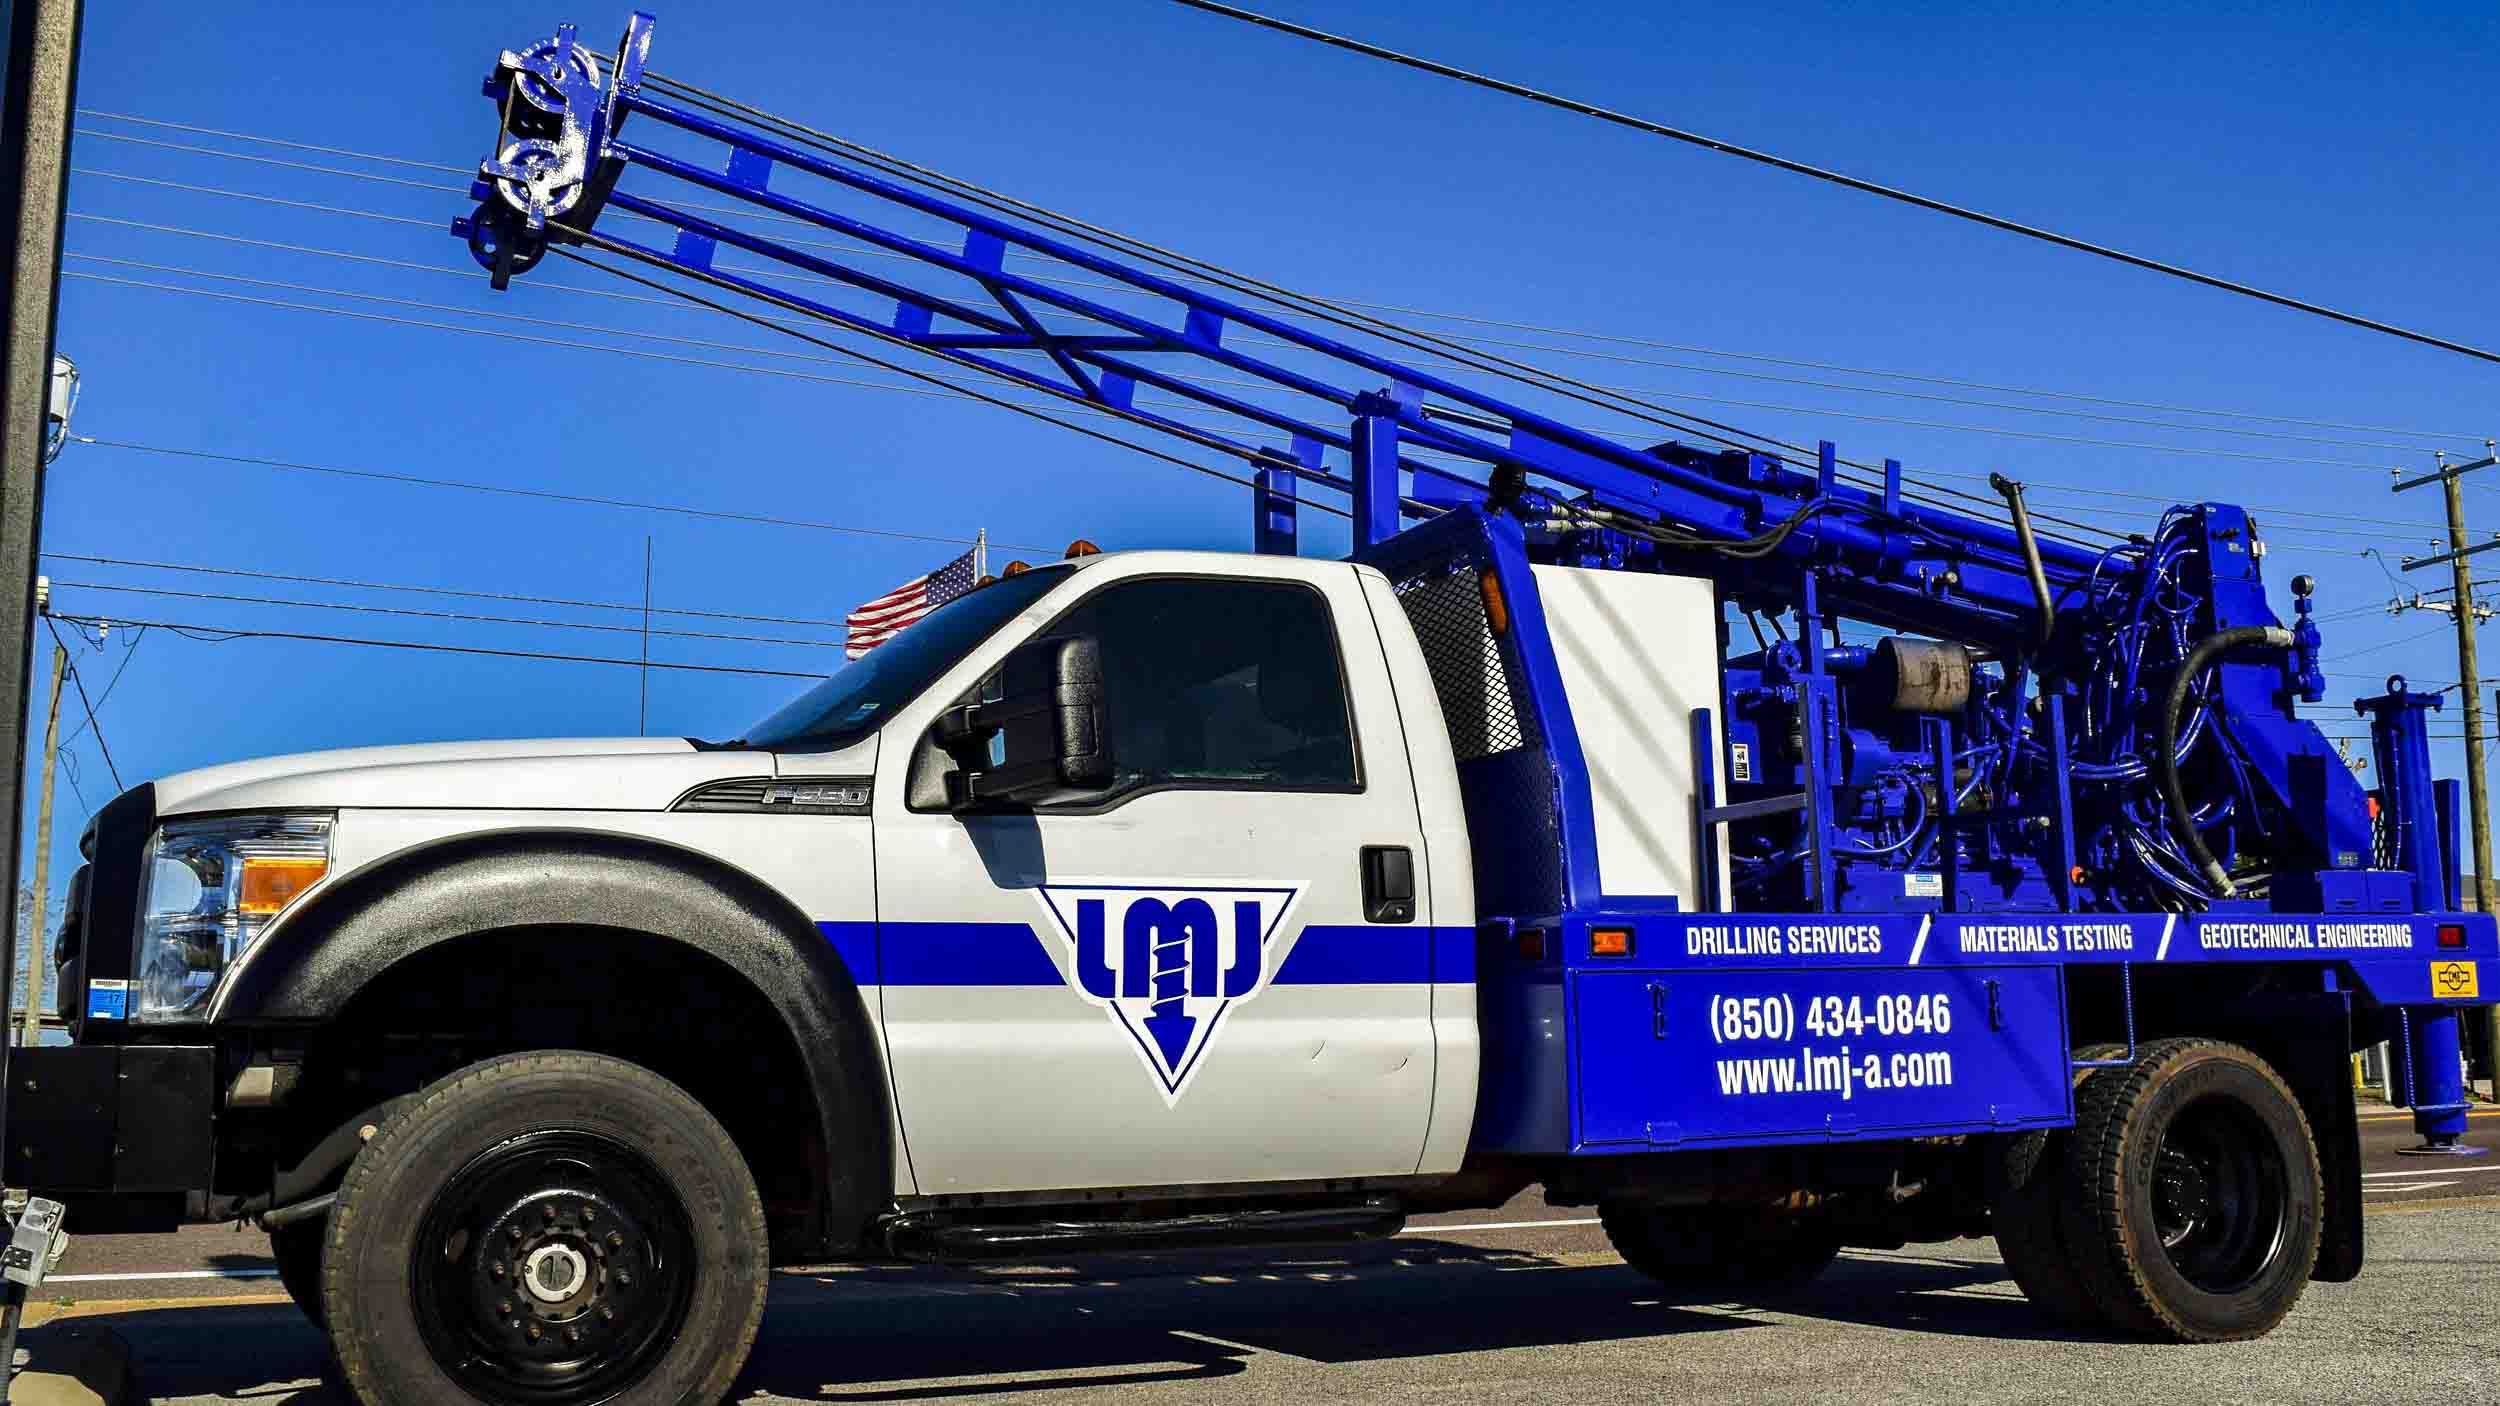 Pensacola Sign Vehicle Graphics - Graphics for LMJ Engineering Truck